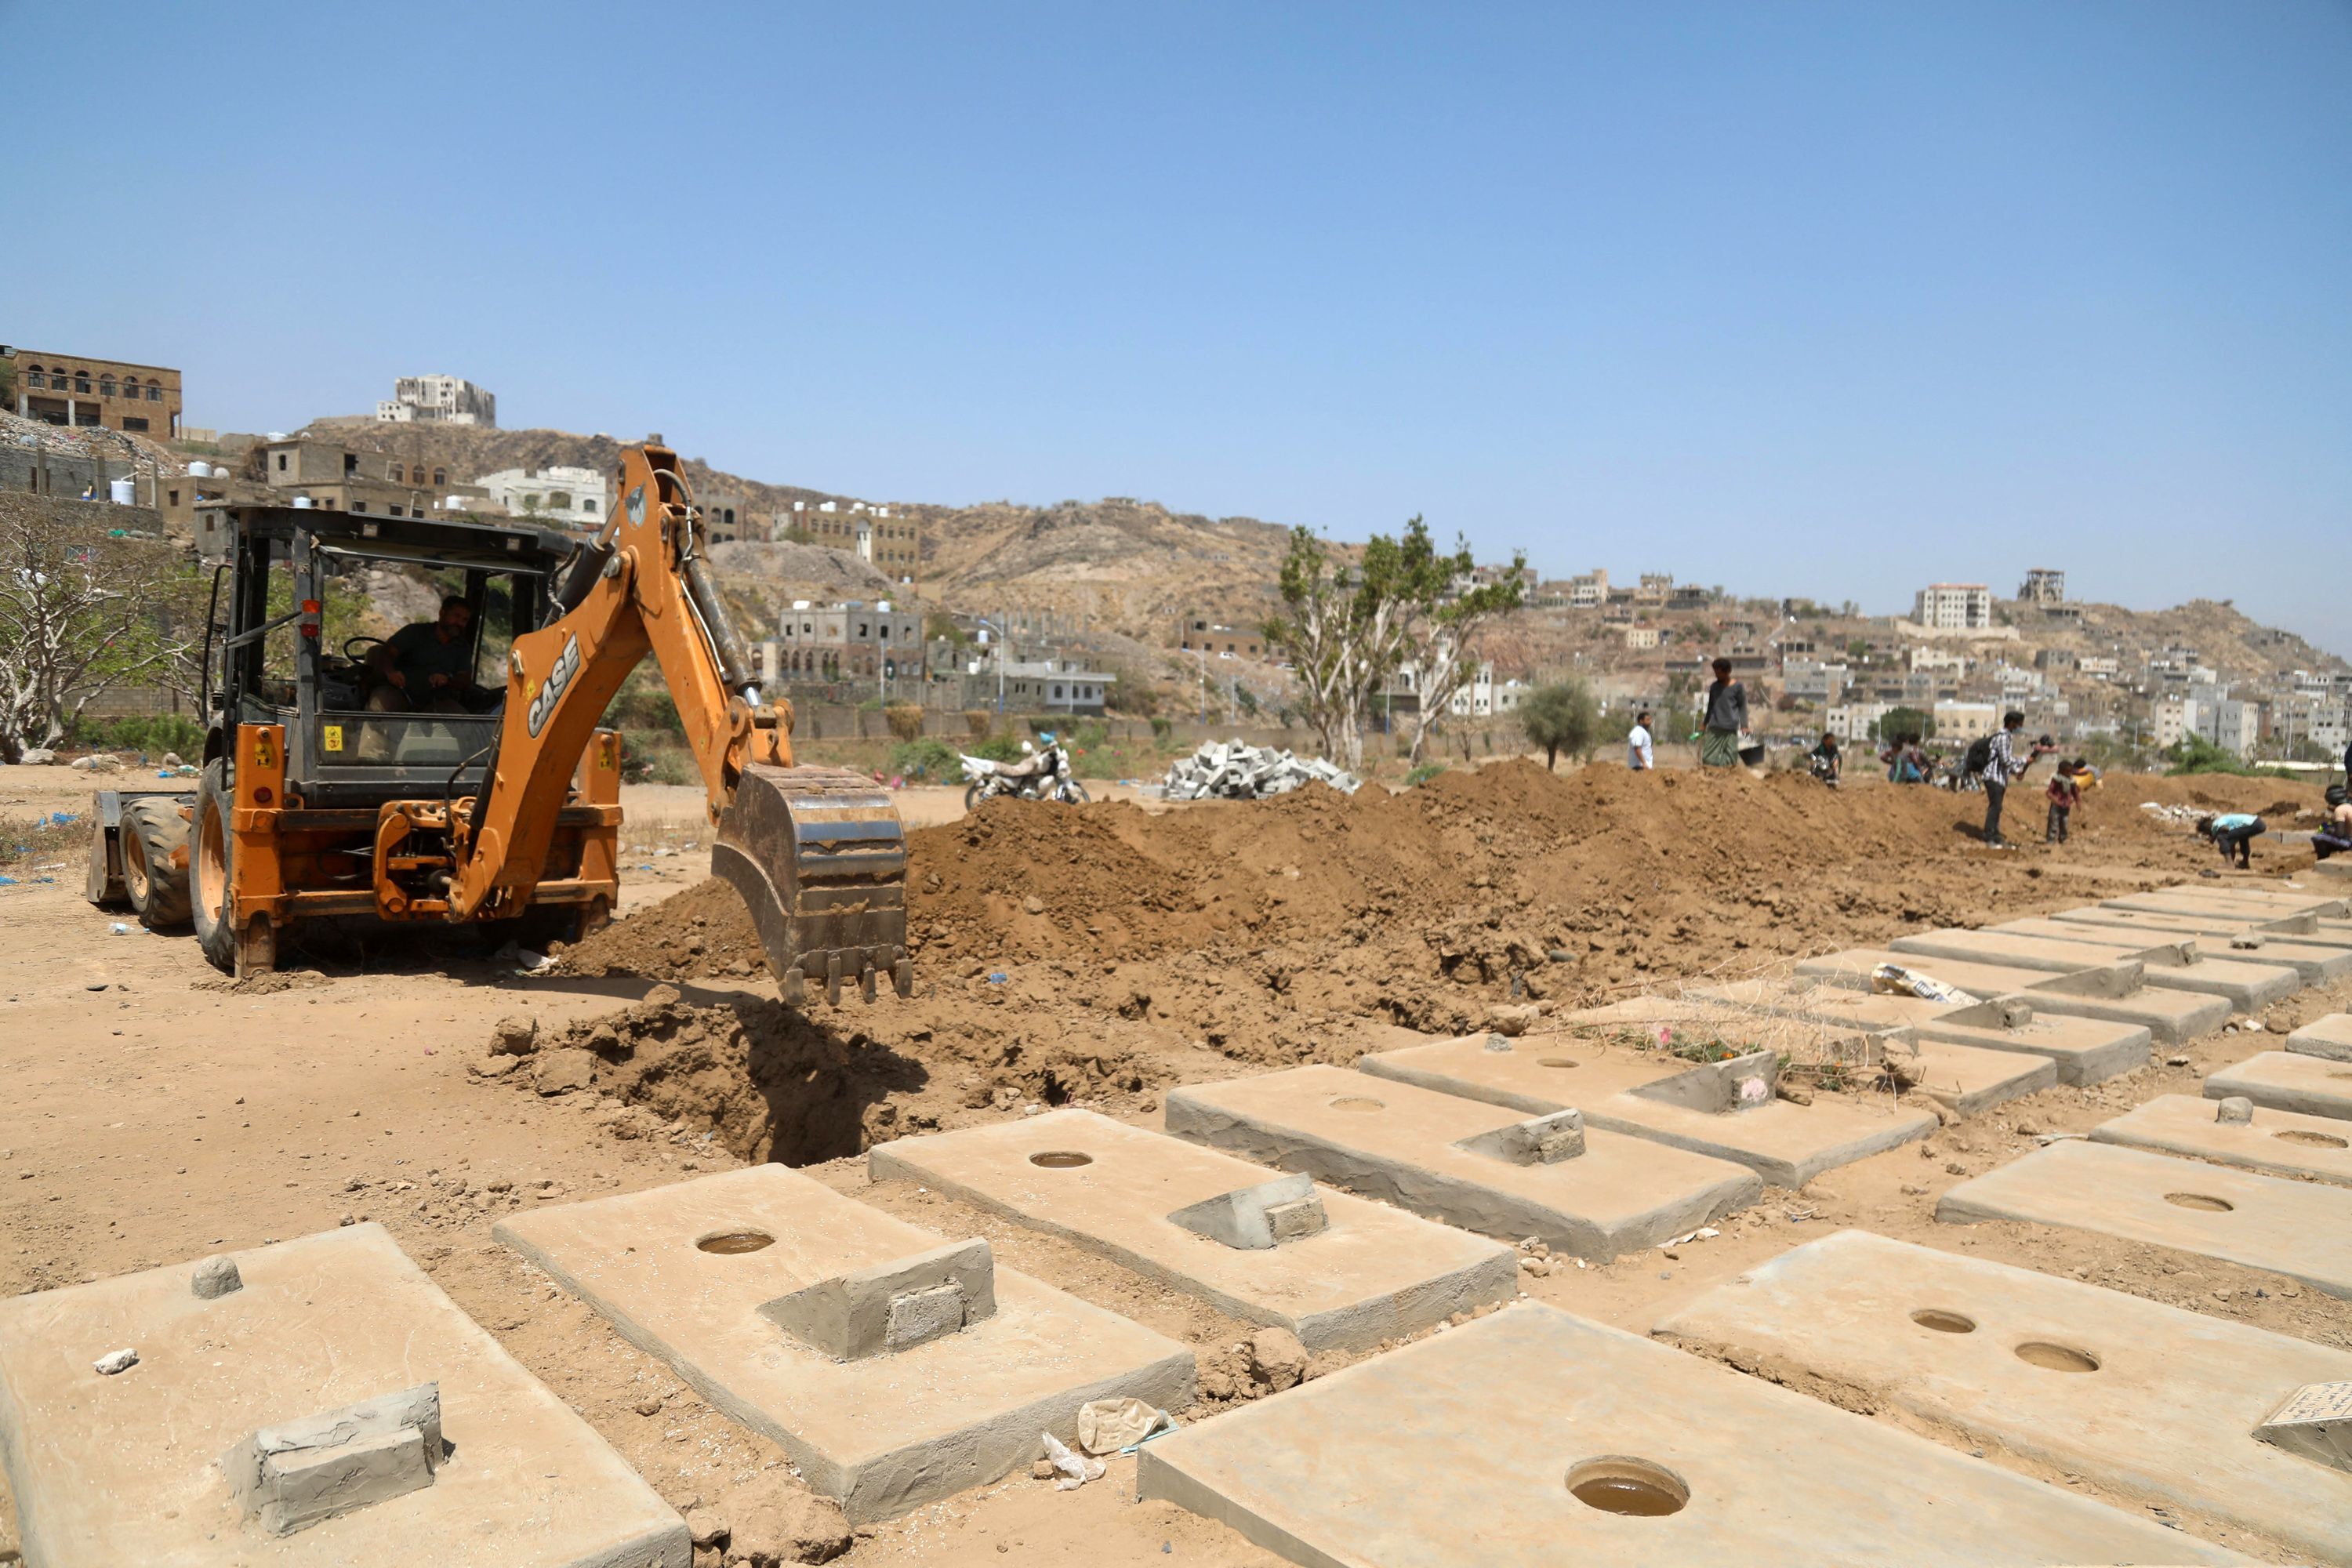 Graves for coronavirus victims are dug at a cemetery in Taez, Yemen, on 3 April, 2021.